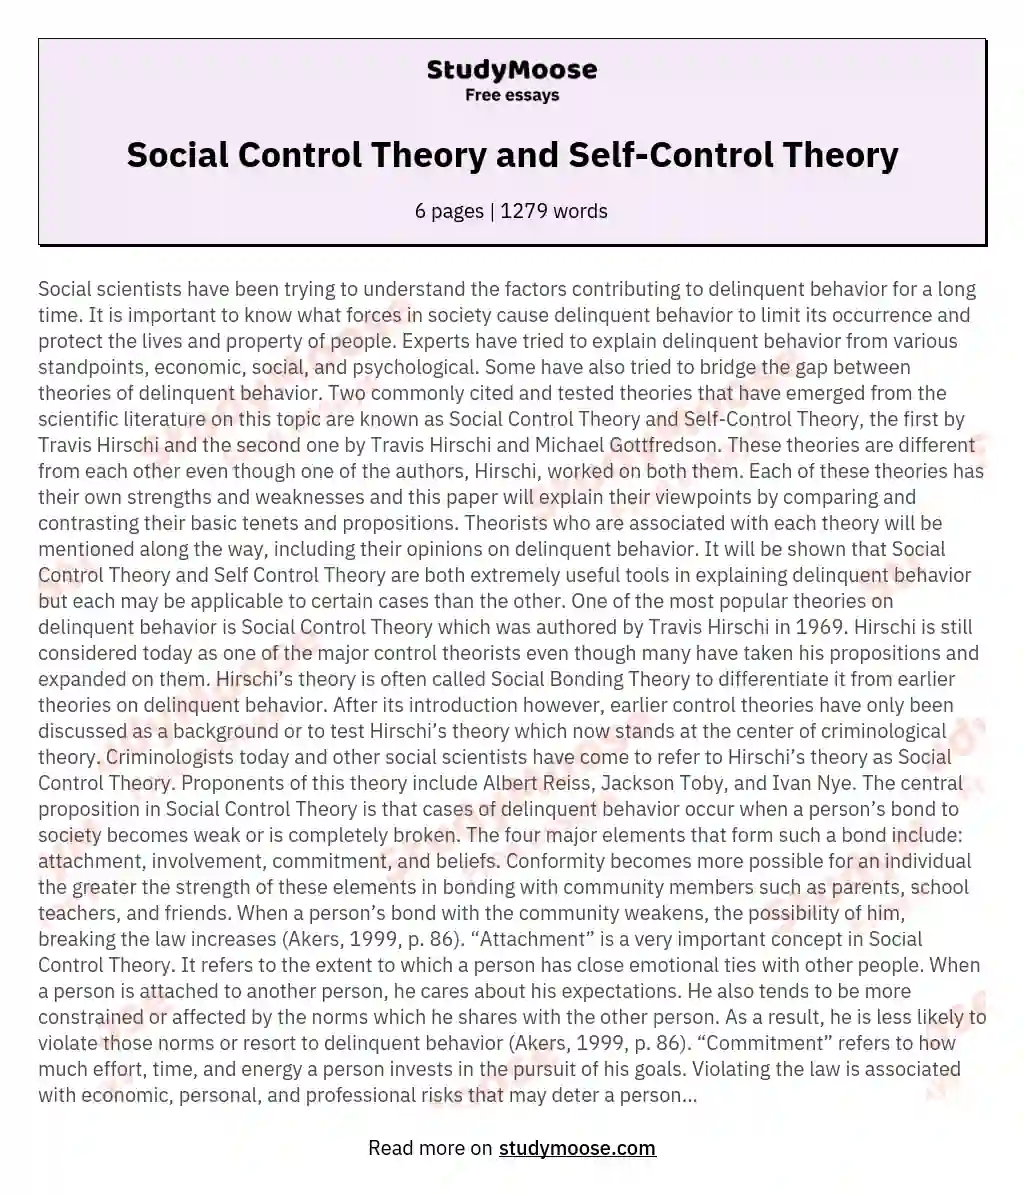 Social Control Theory and Self-Control Theory essay